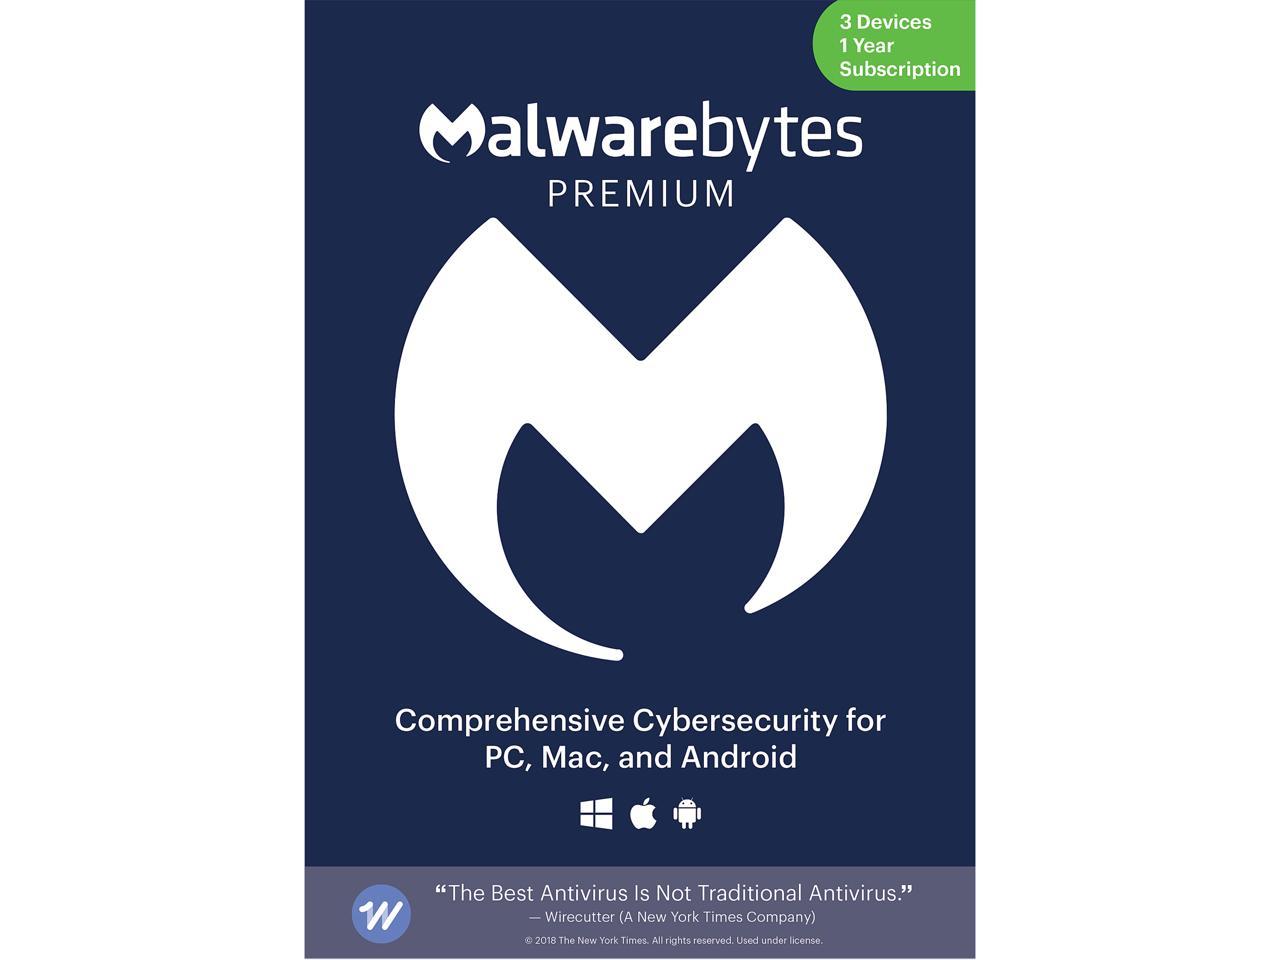 is malwarebytes free version allowed for business